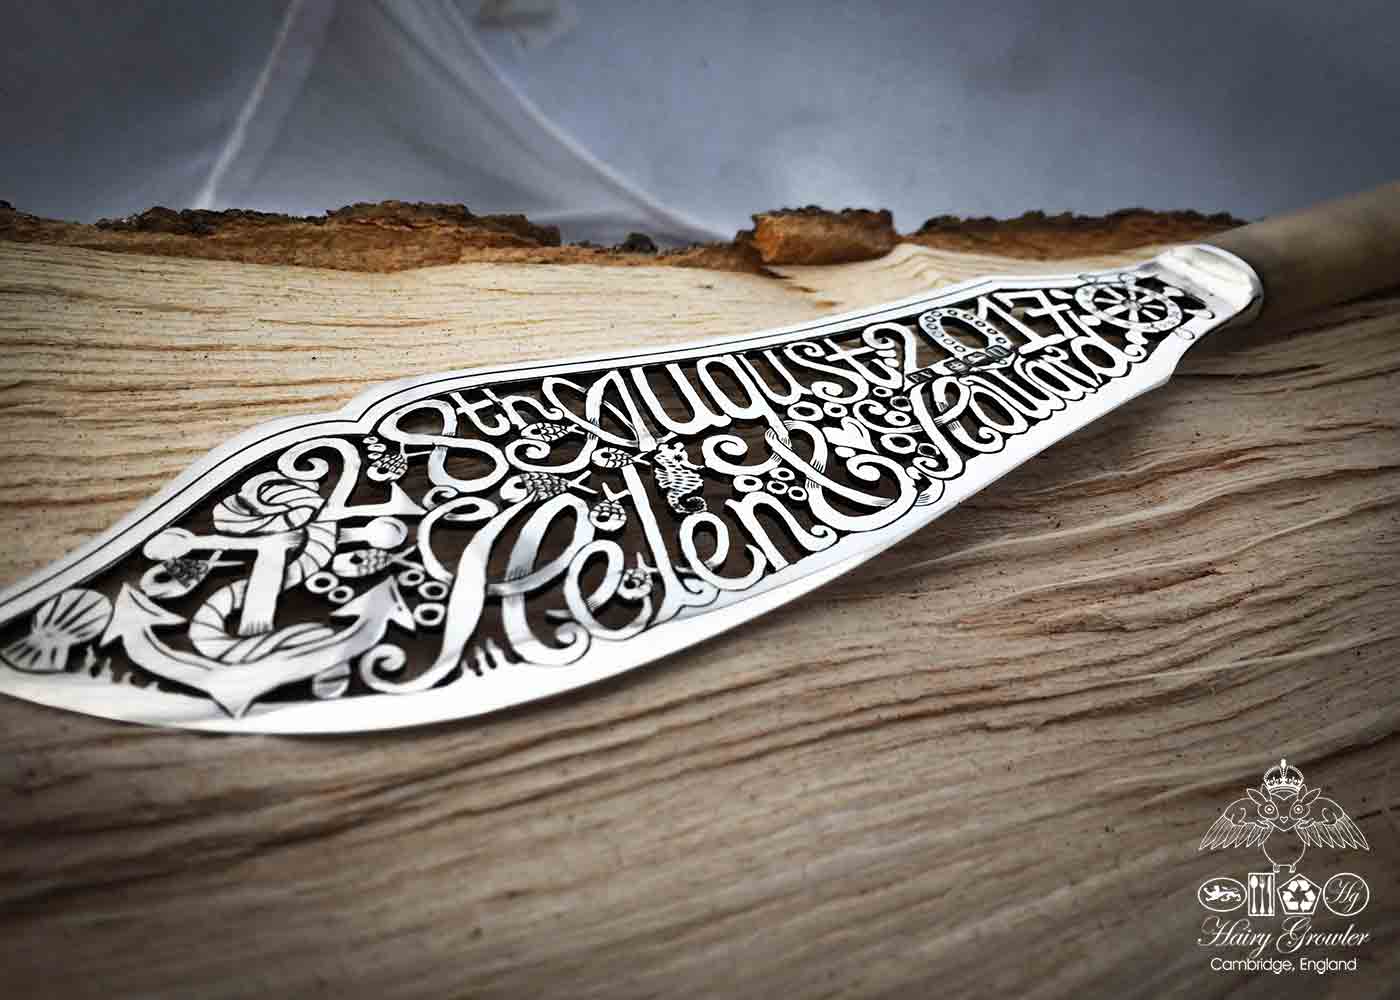 Ethical wedding gifts and heirloom quality wedding cakes knives created from transformed antique silver.